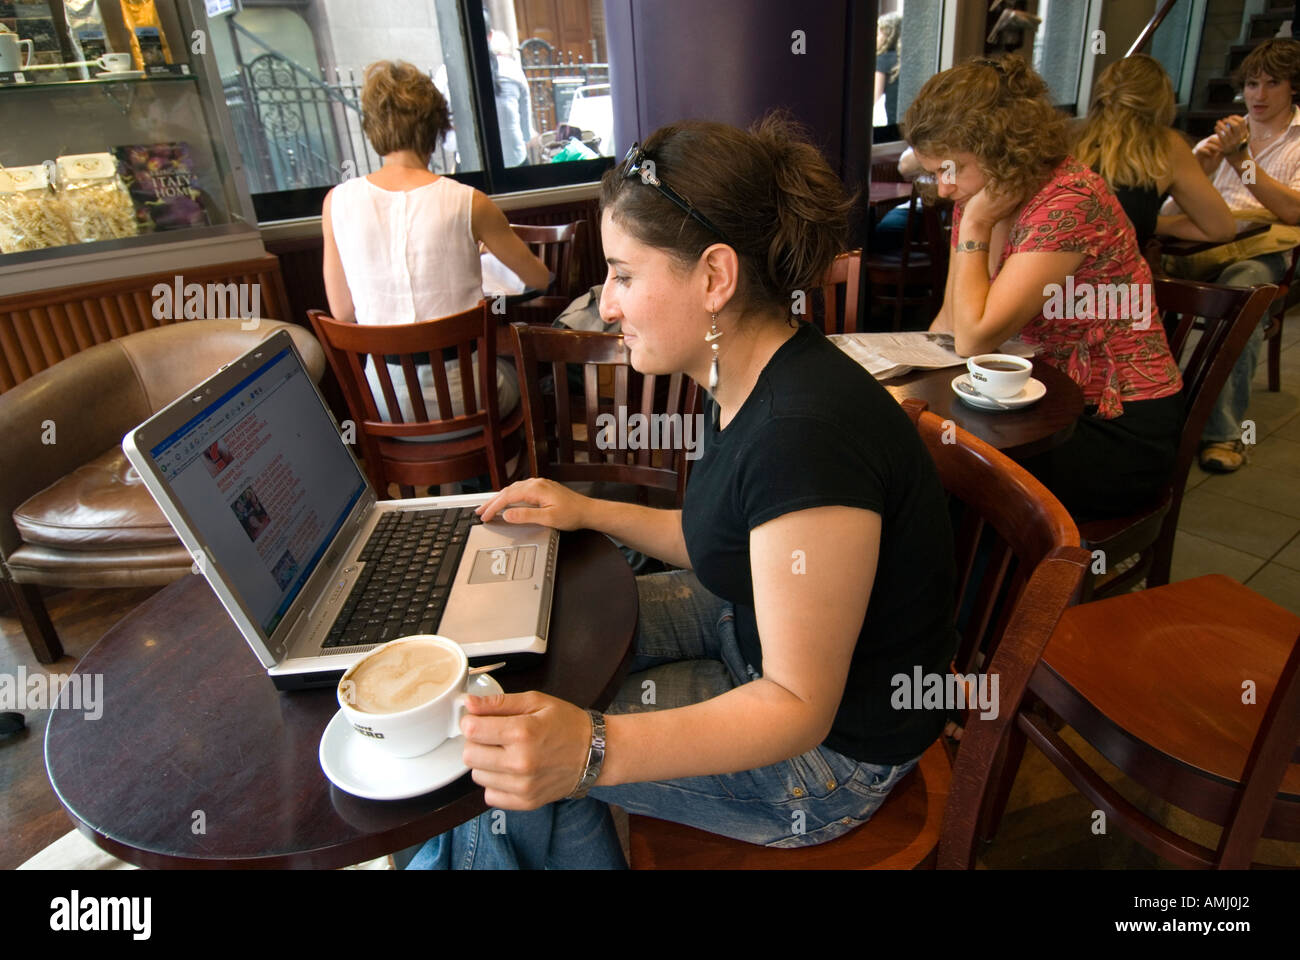 Young woman browsing the internet on a laptop computer in a Caffe Nero, London, England, UK Stock Photo